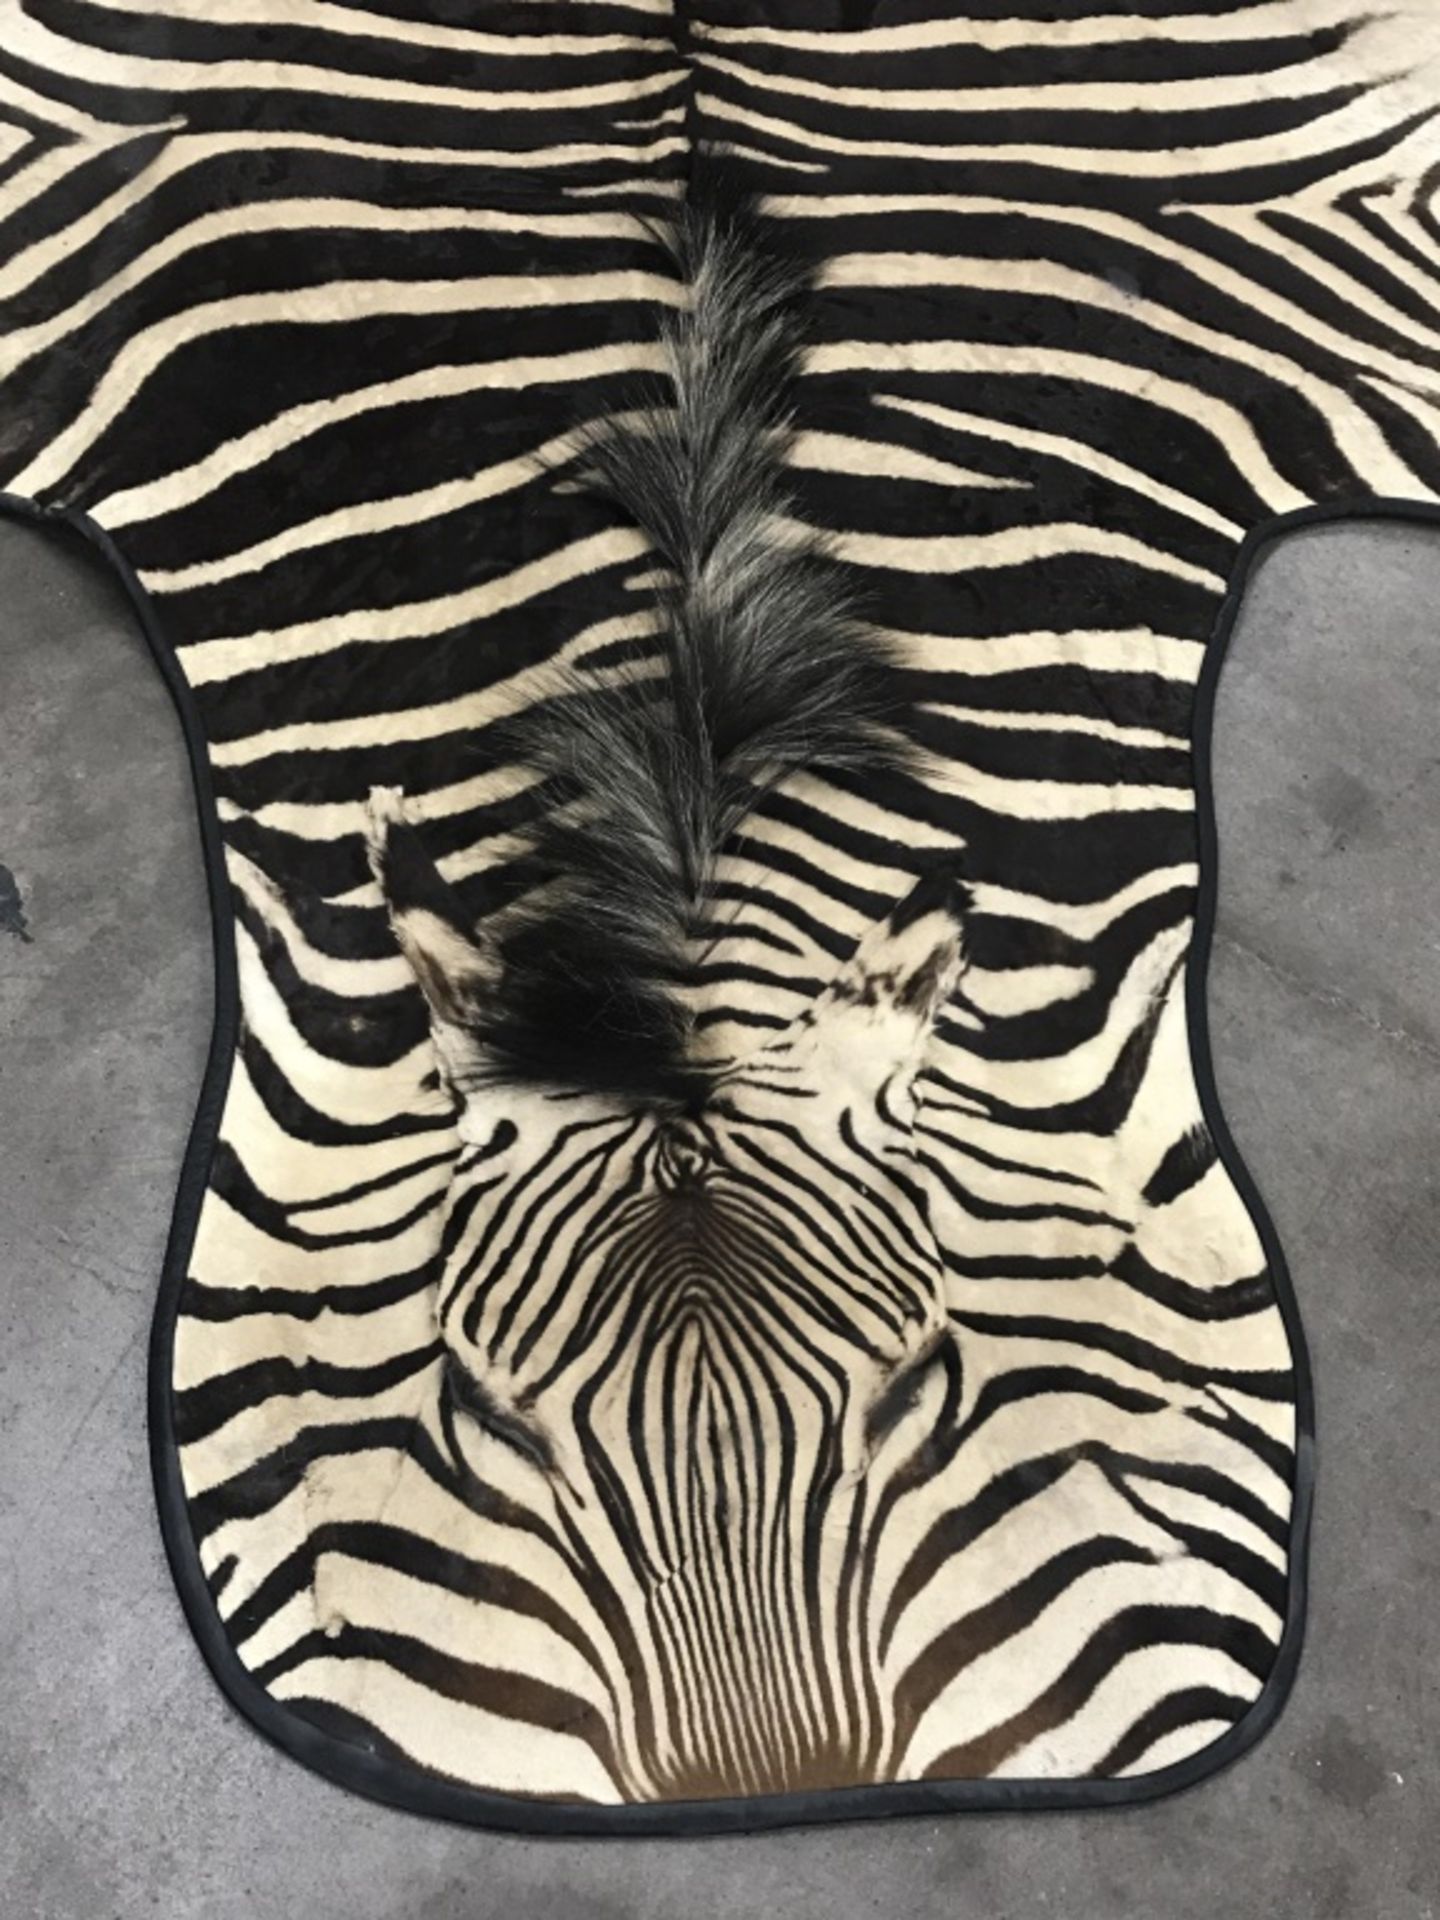 Very Nice Zebra Rug (TX Res. Only) - Image 6 of 13